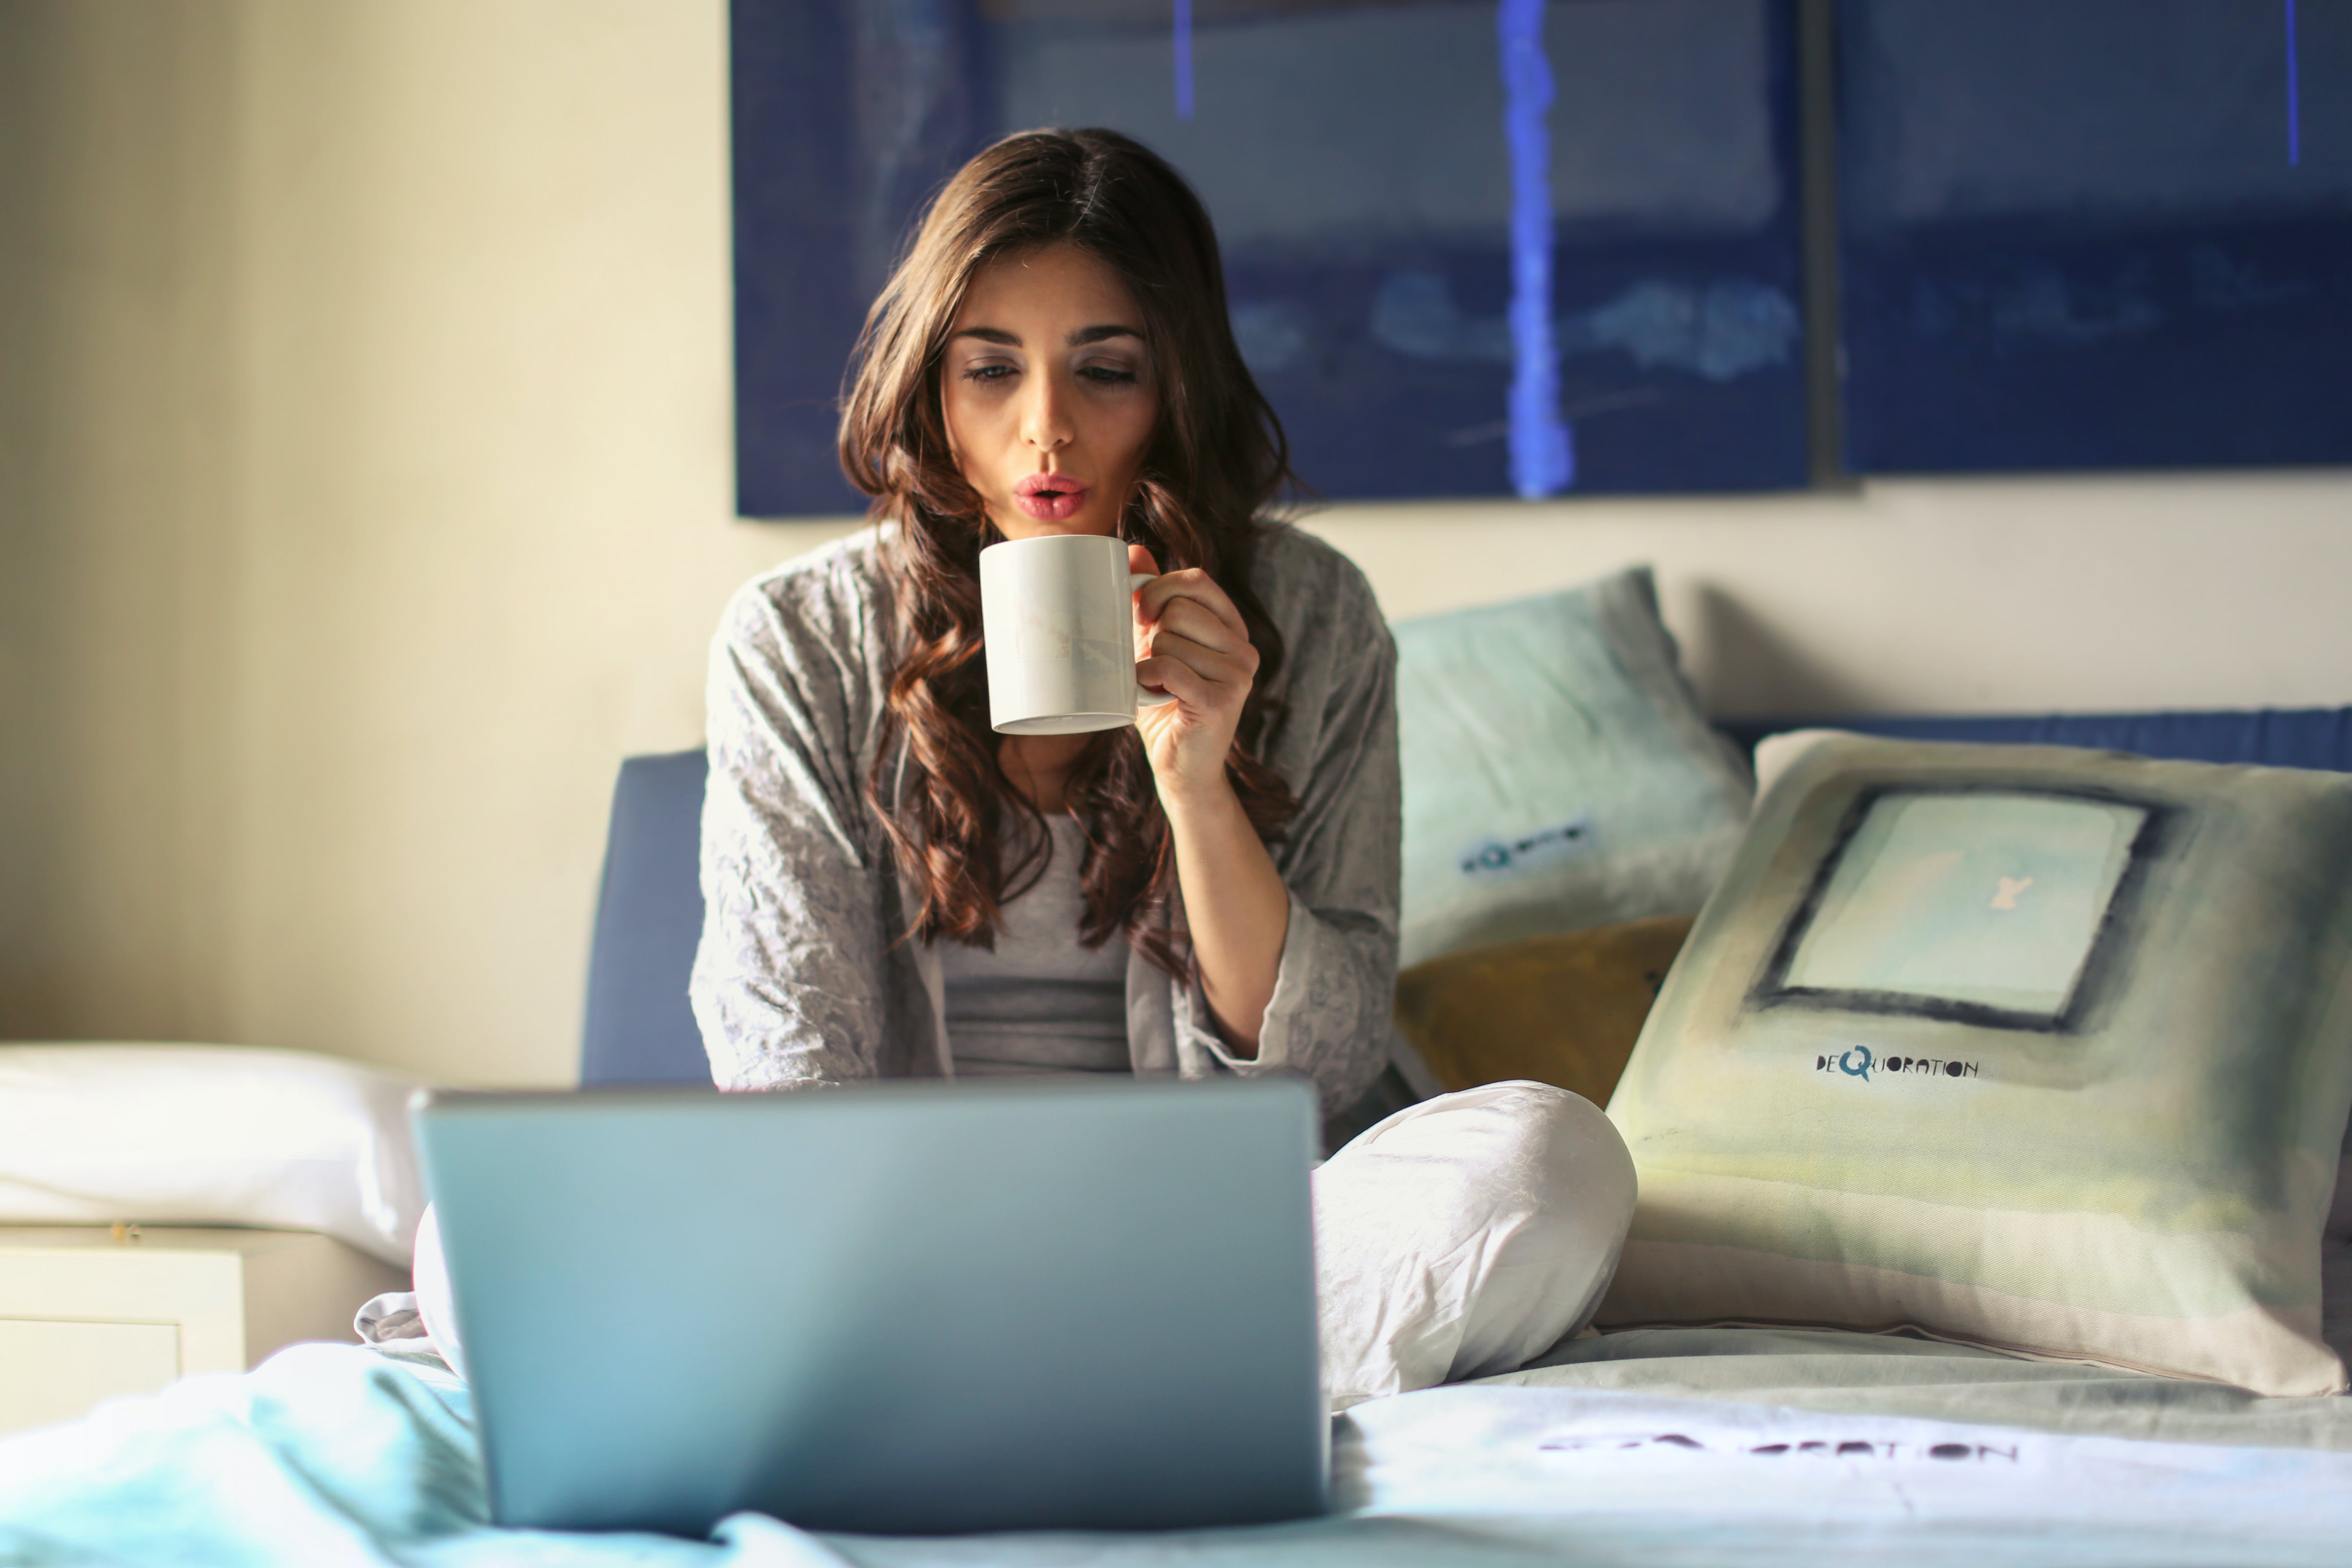 A woman using her laptop in bed | Source: Pexels